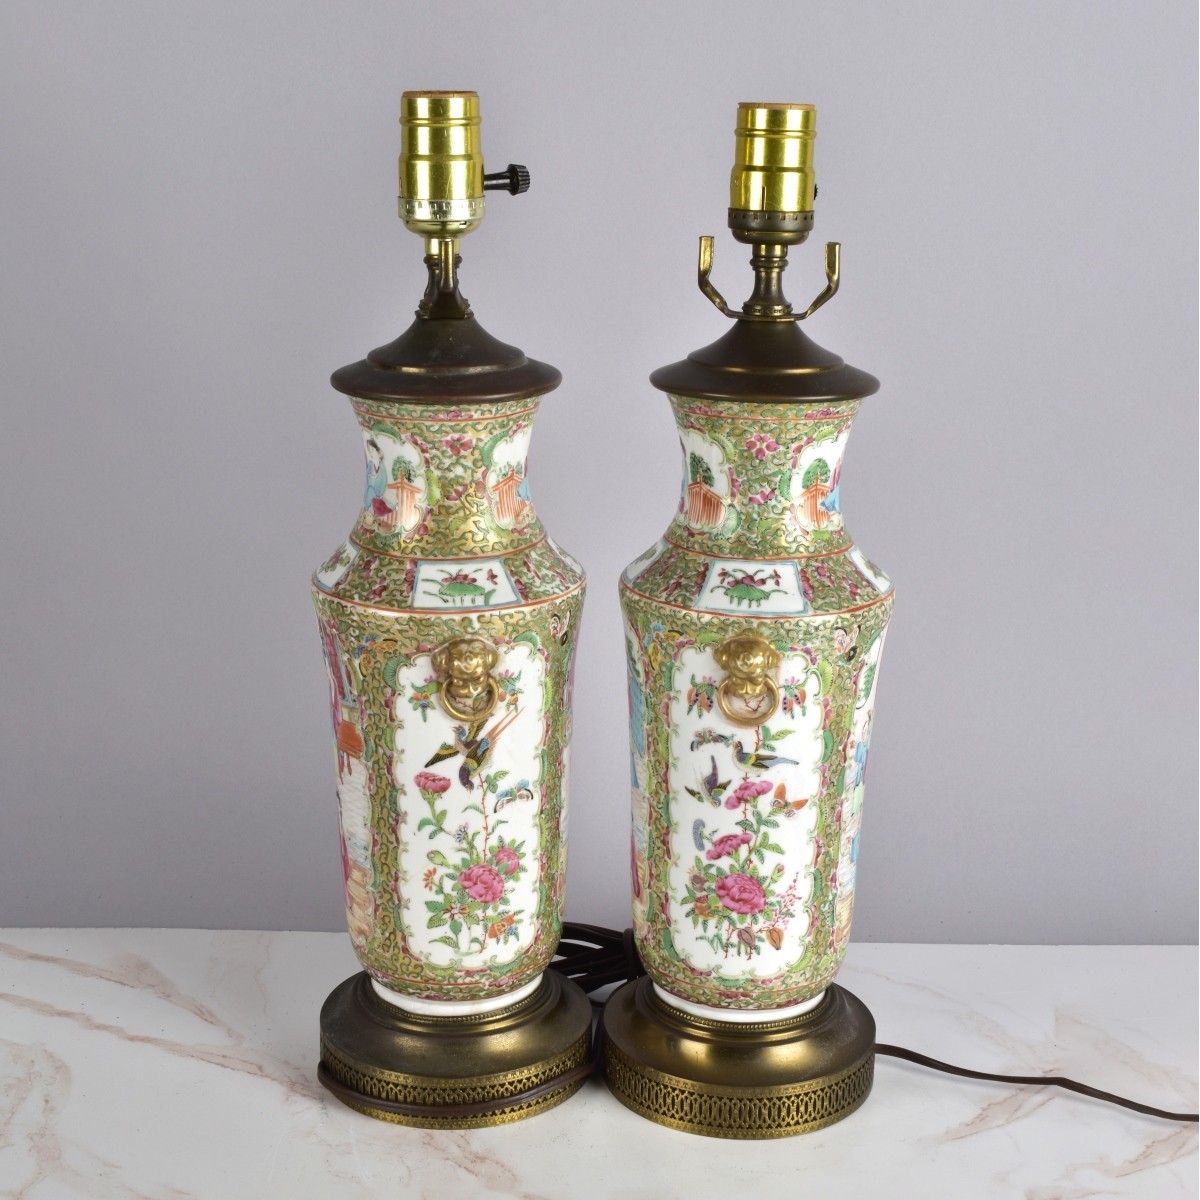 Pair of Chinese Rose Medallion Lamps